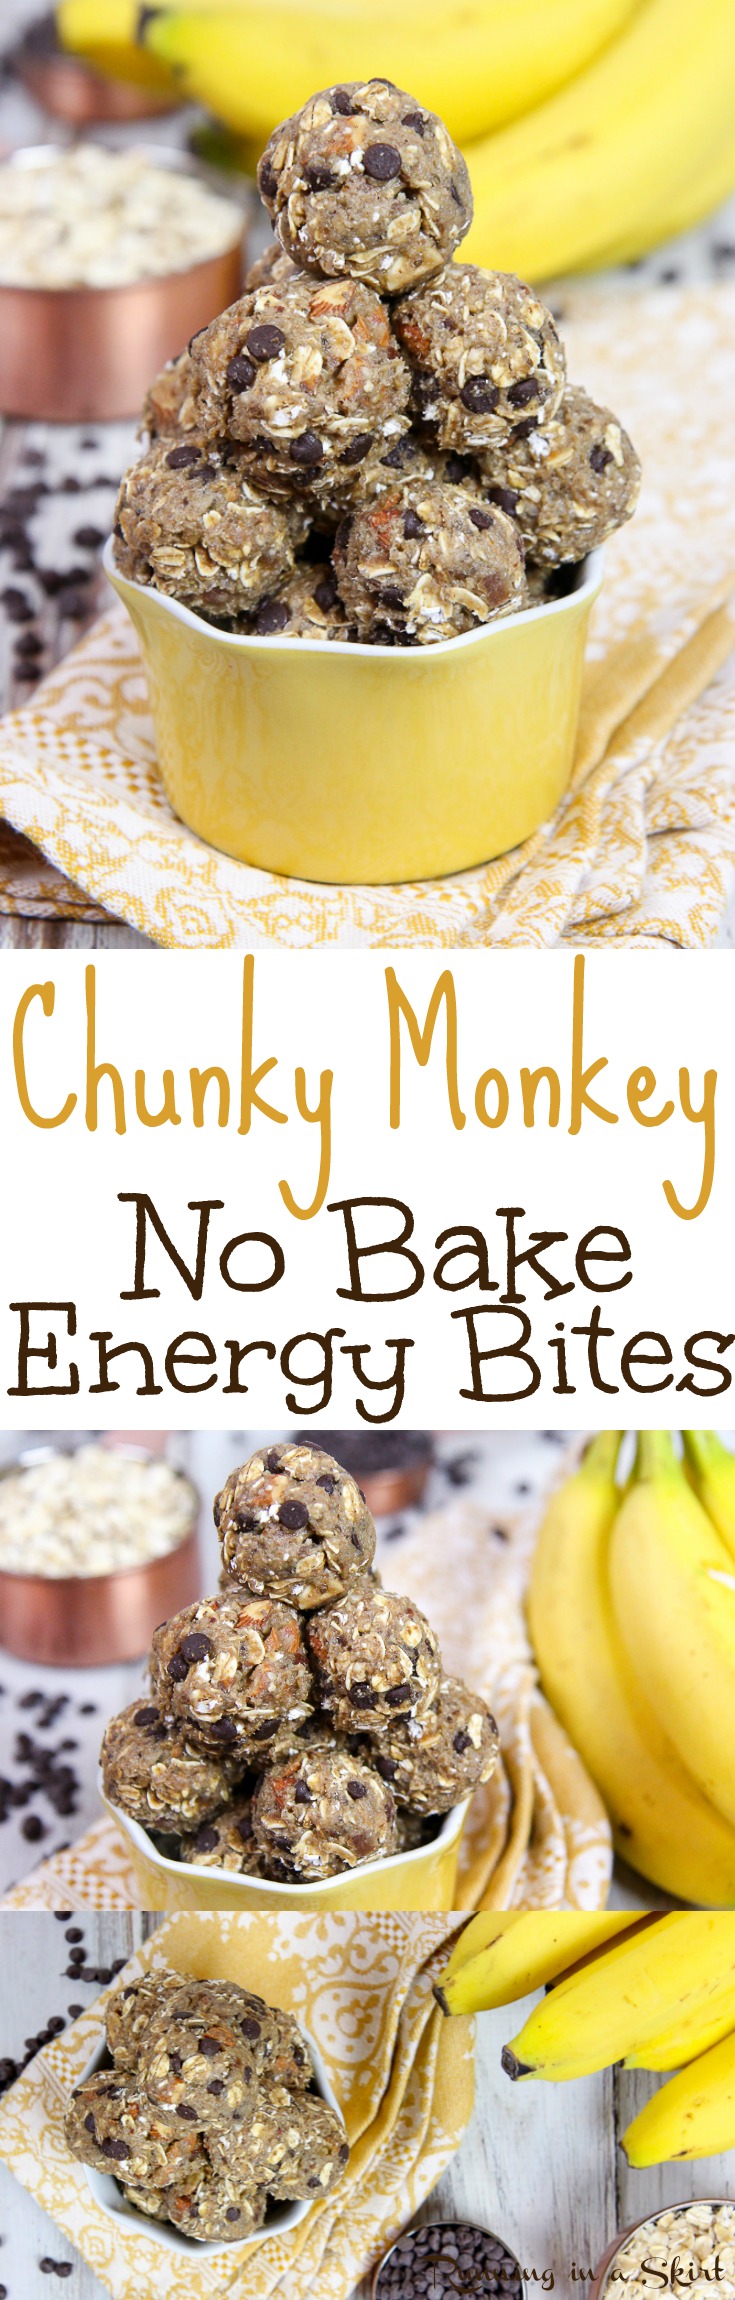 Chunky Monkey Healthy No Bake Energy Bites recipe. Easy, clean eating and perfect for quick snacks Uses banana, dates, chocolate, almonds and without peanut butter. Vegetarian, Vegan & Gluten Free friendly / Running in a Skirt via @juliewunder